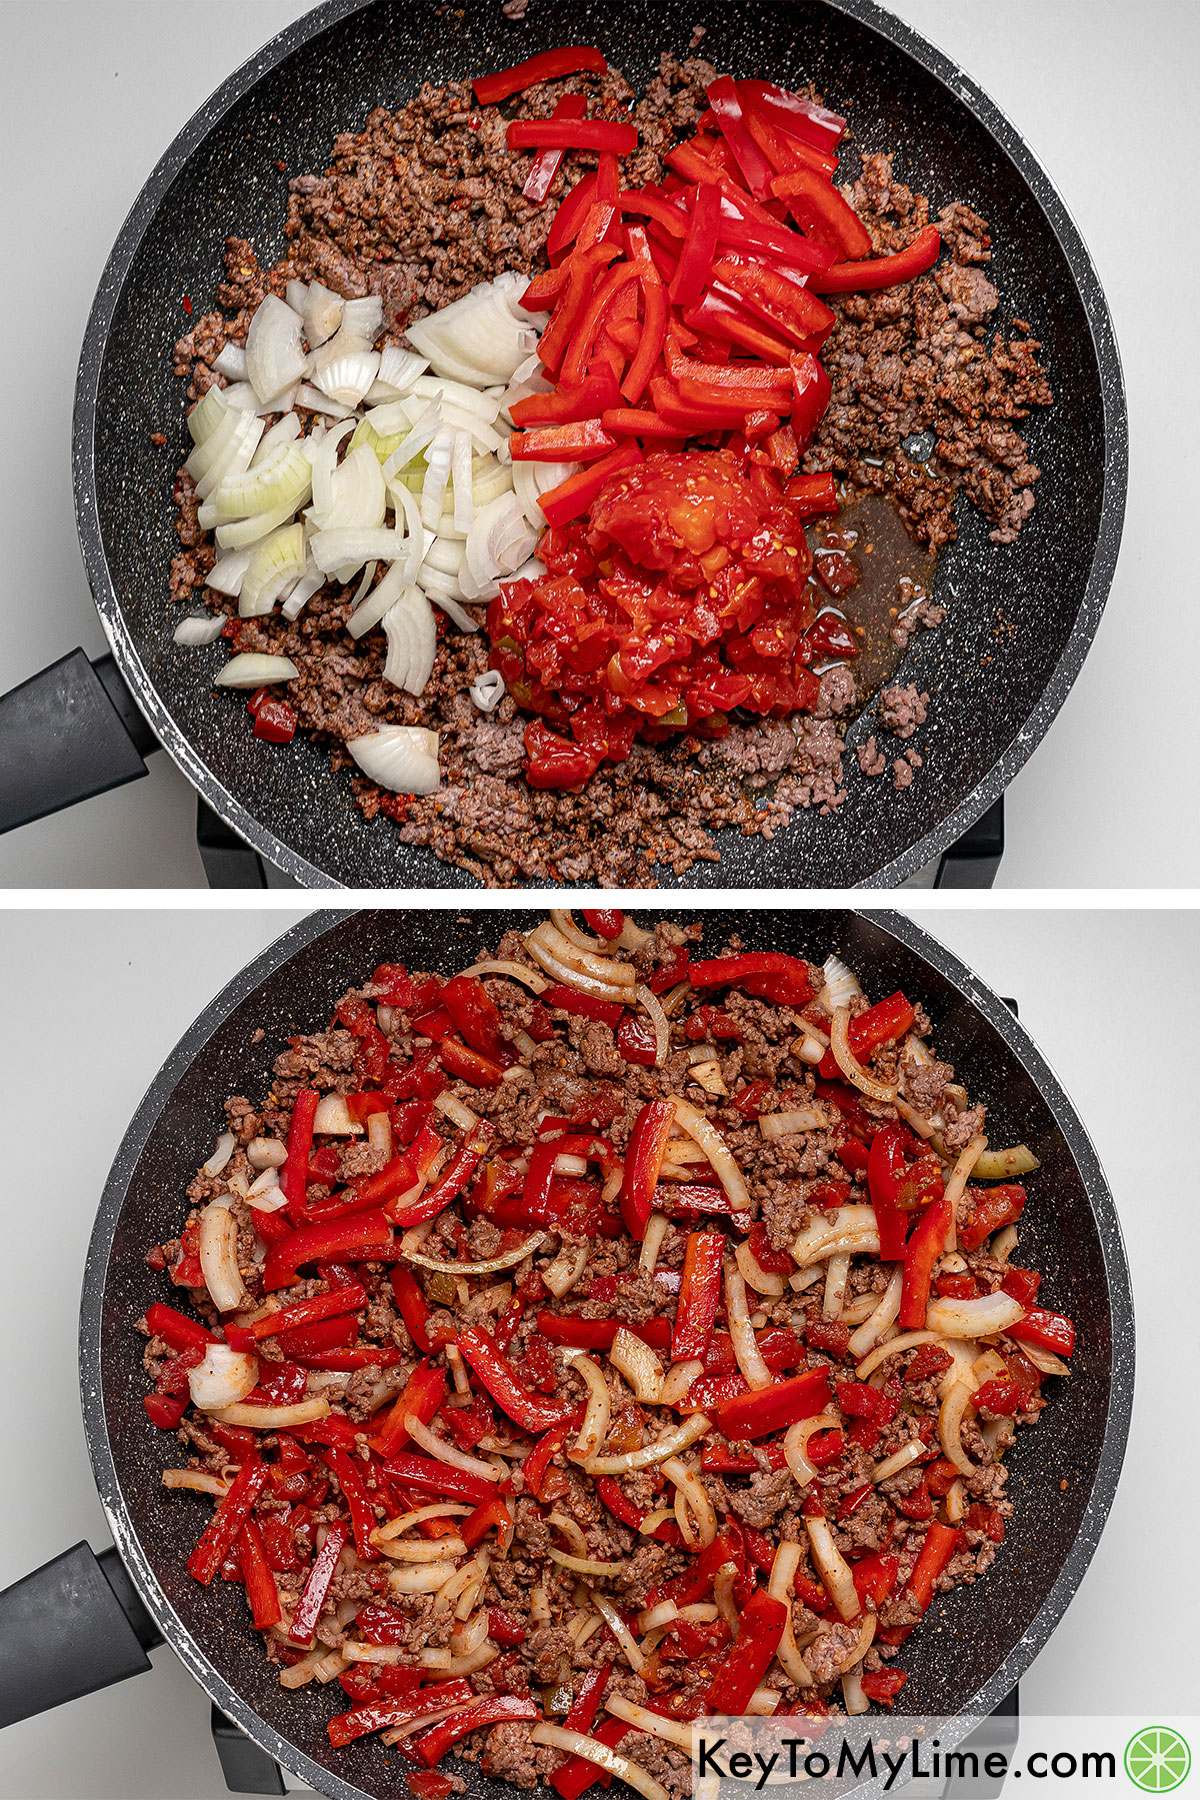 Mixing the beef and spices then adding onions, tomatoes and peppers.